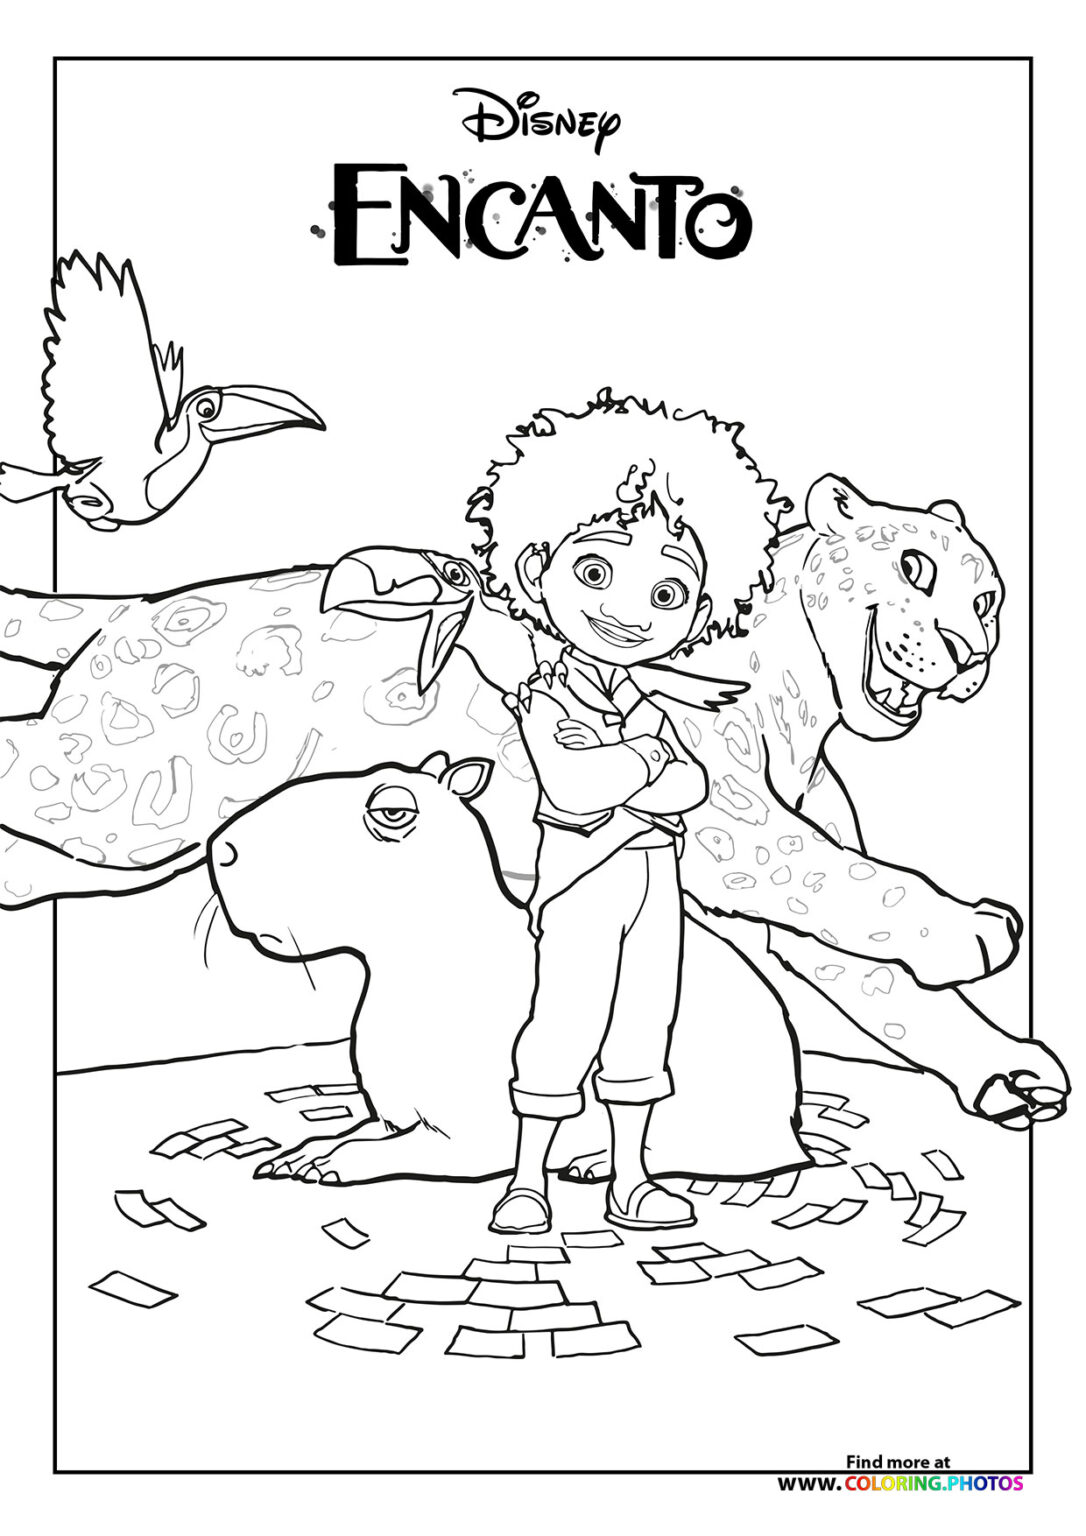 Encanto Printable Coloring Pages